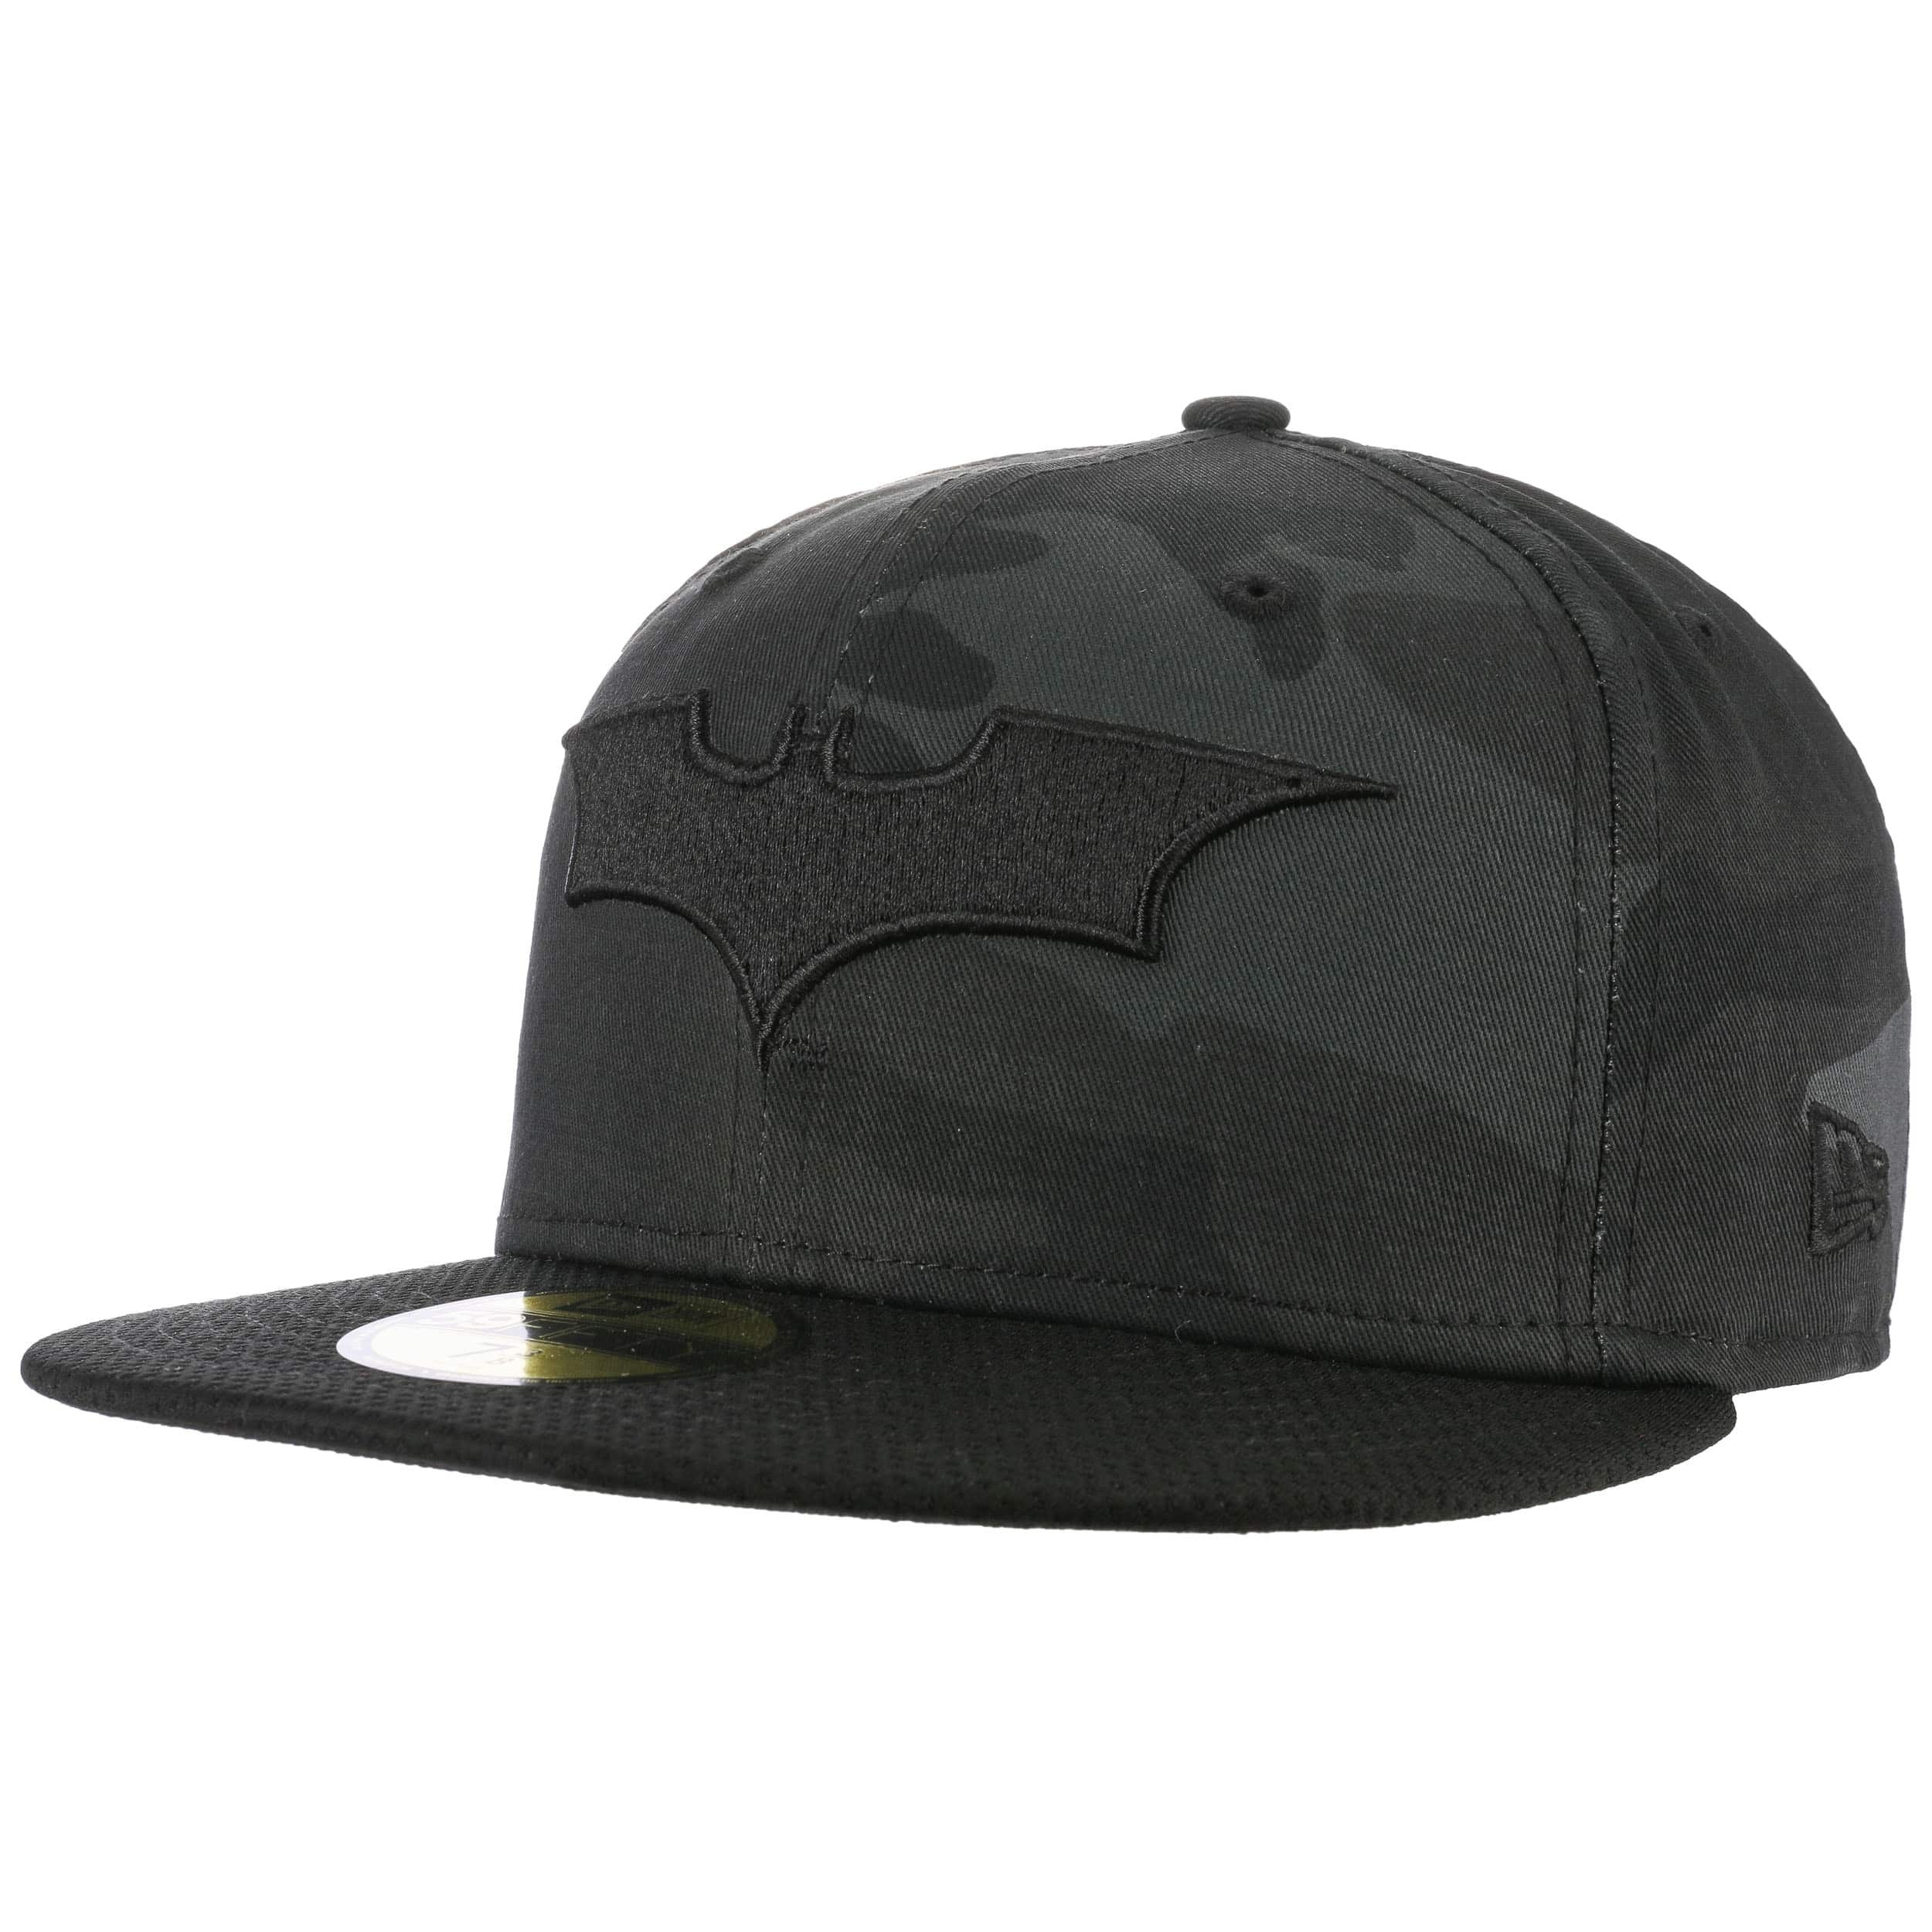 batman fitted hat